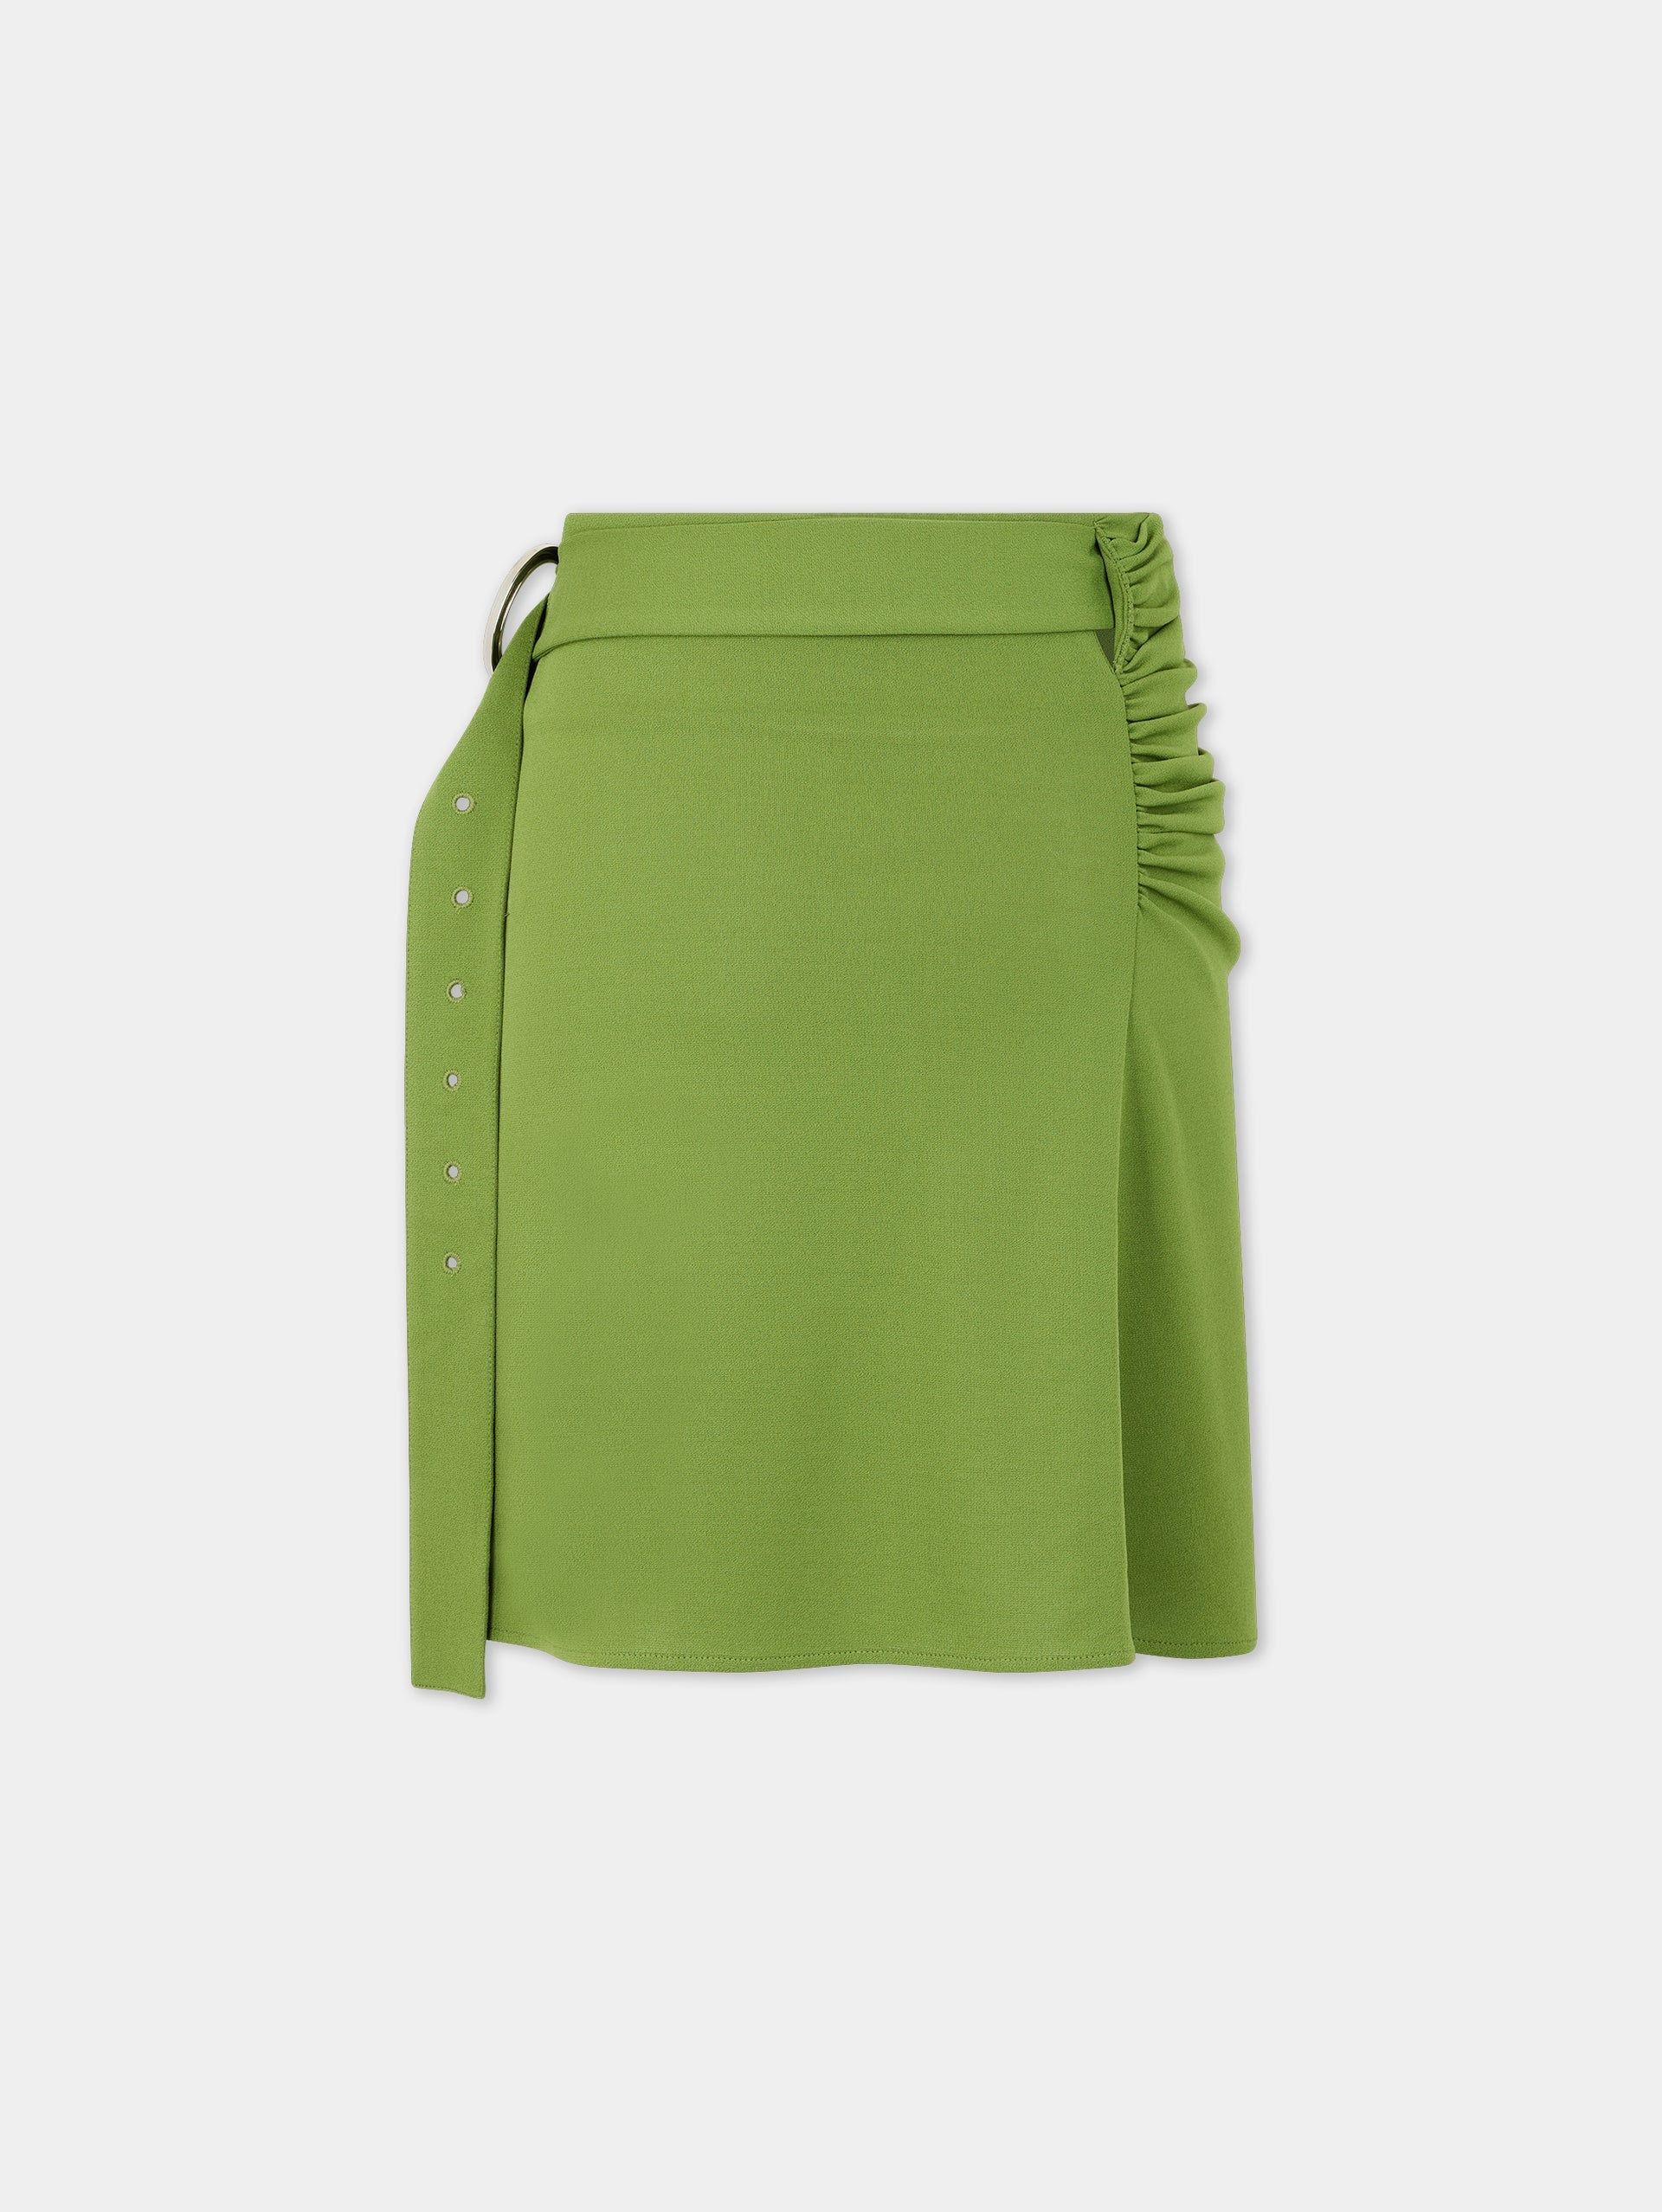 GREEN DRAPED SKIRT WITH PIERCING DETAIL - 6